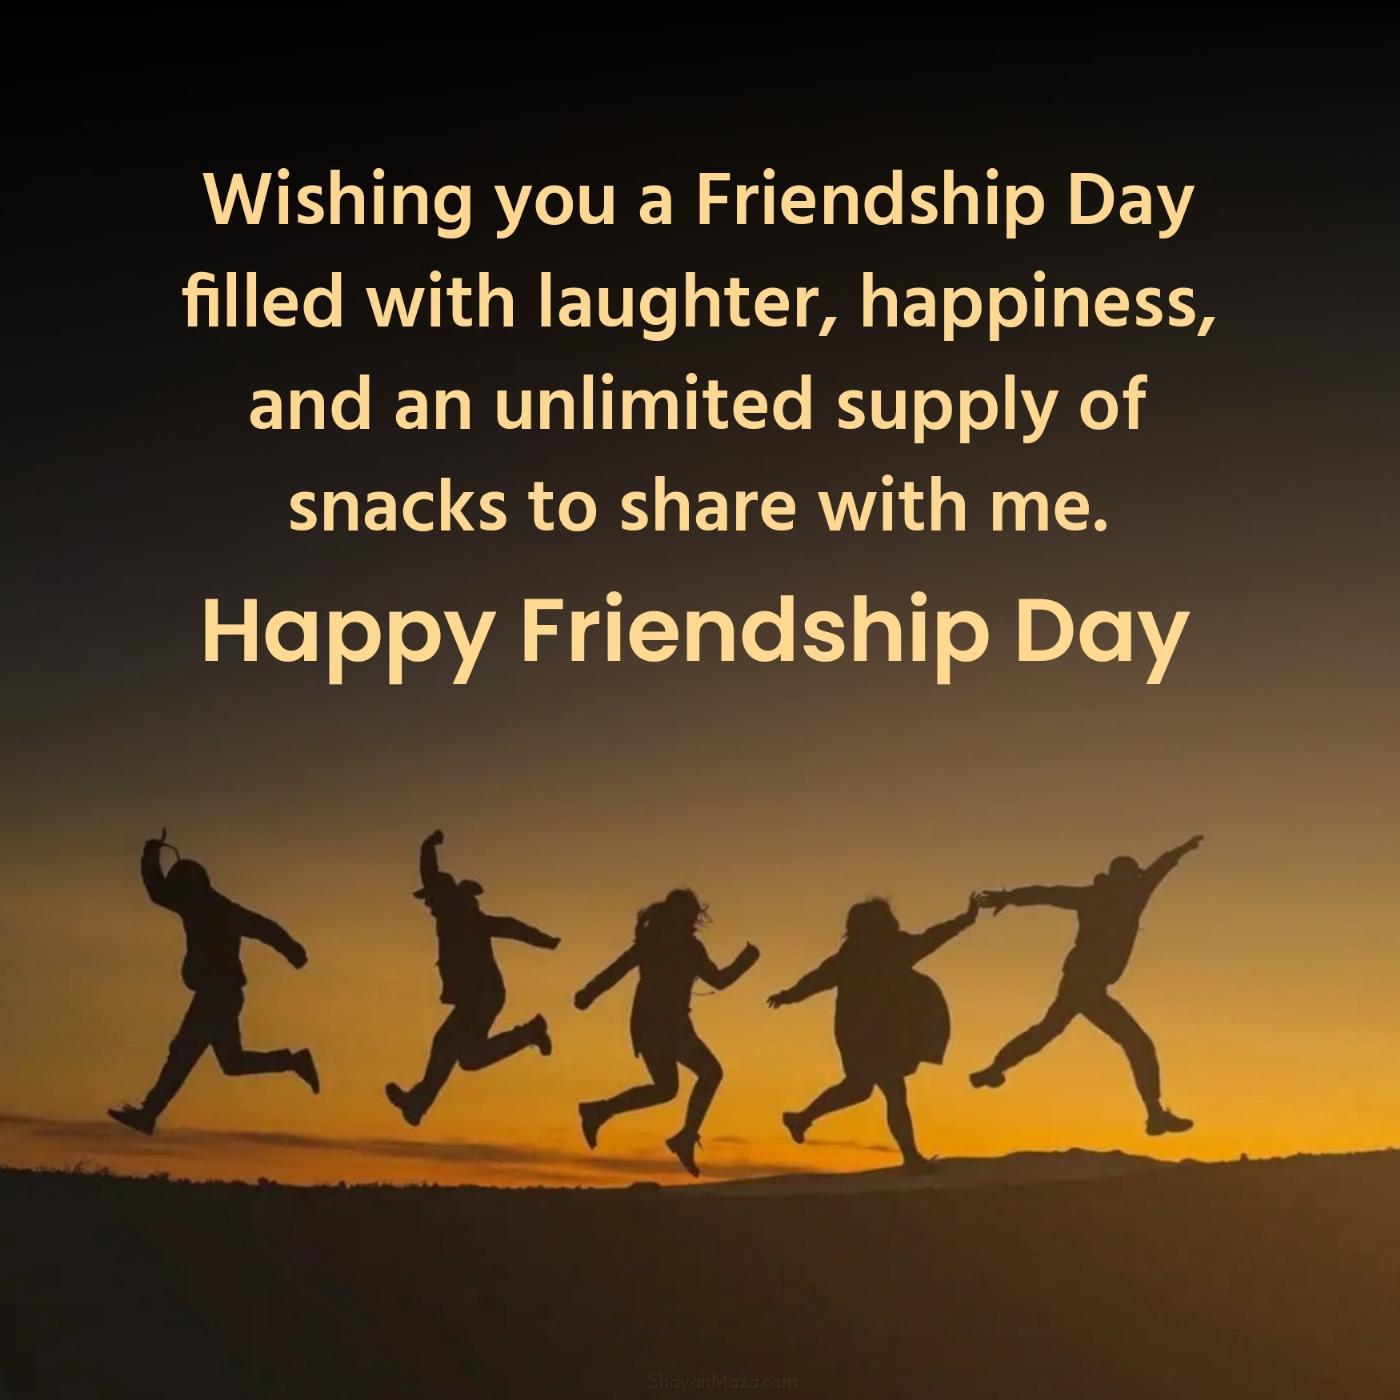 Wishing you a Friendship Day filled with laughter happiness